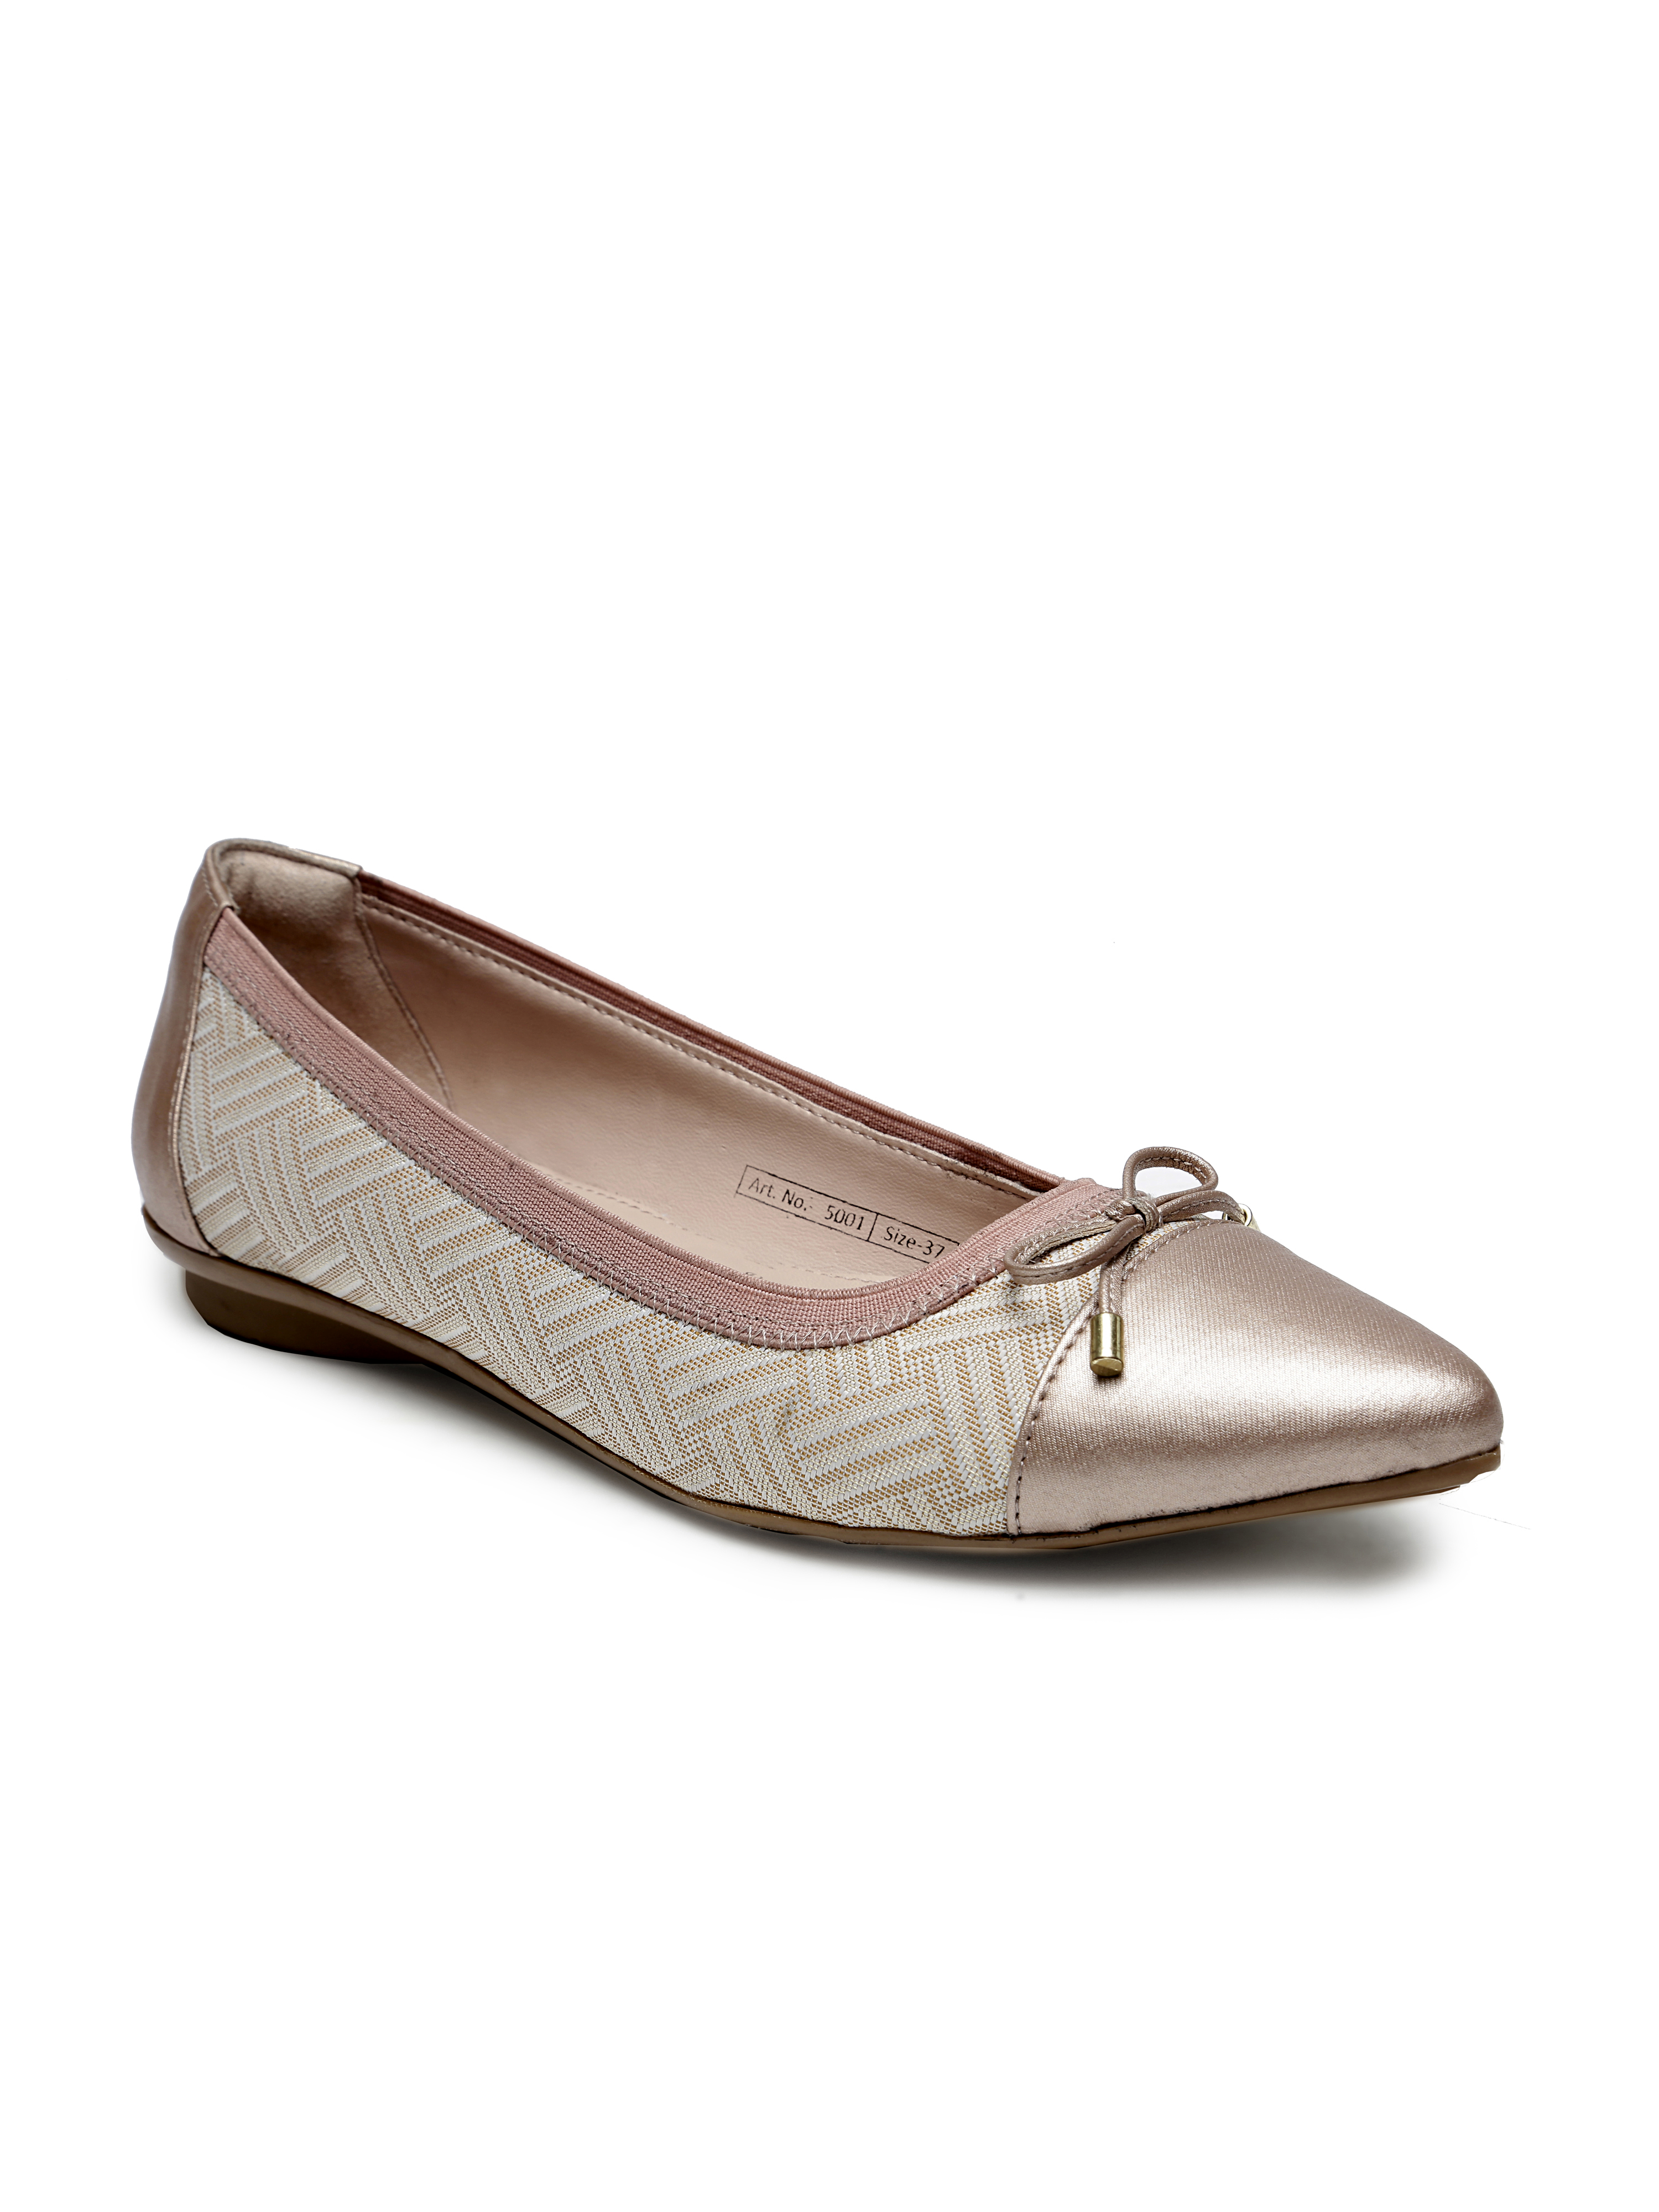 Buy Von Wellx Germany Comfort Women's Peach Casual Shoes Lisa Online in Chennai